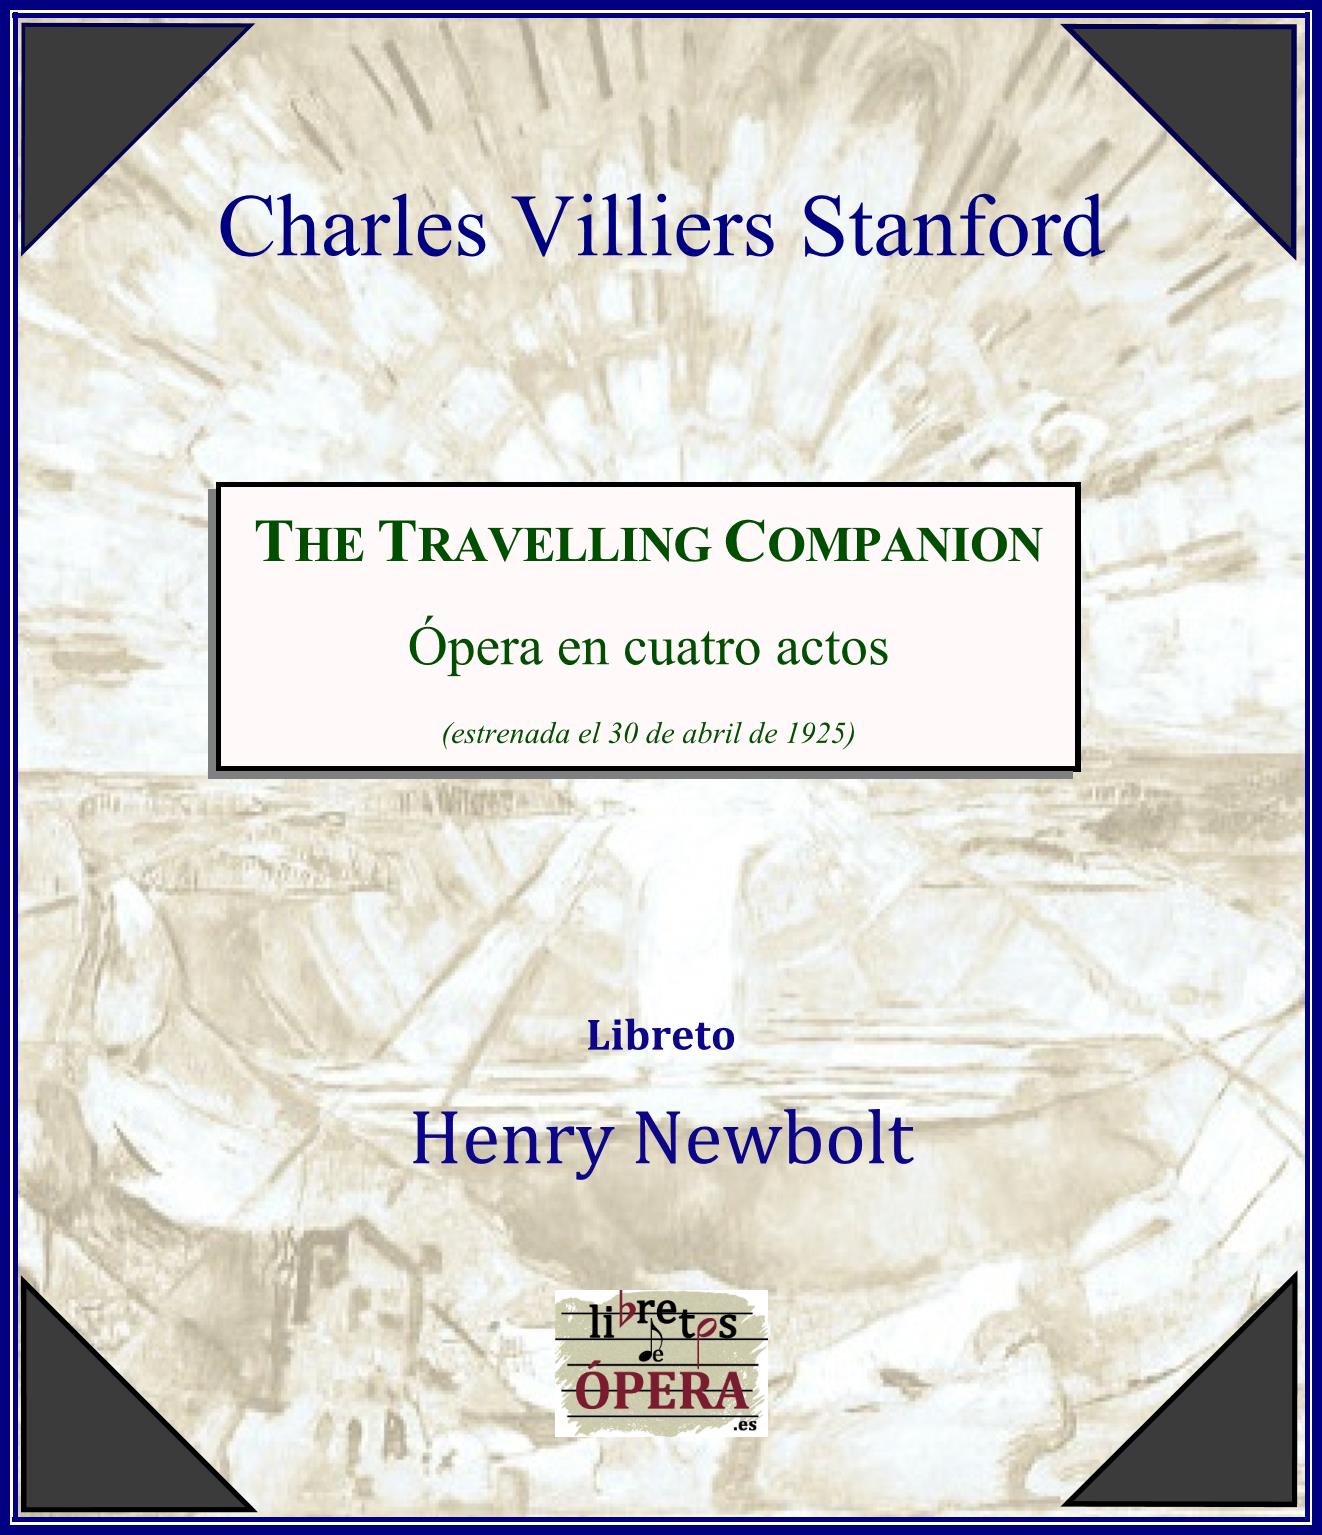 THE TRAVELLING COMPANION